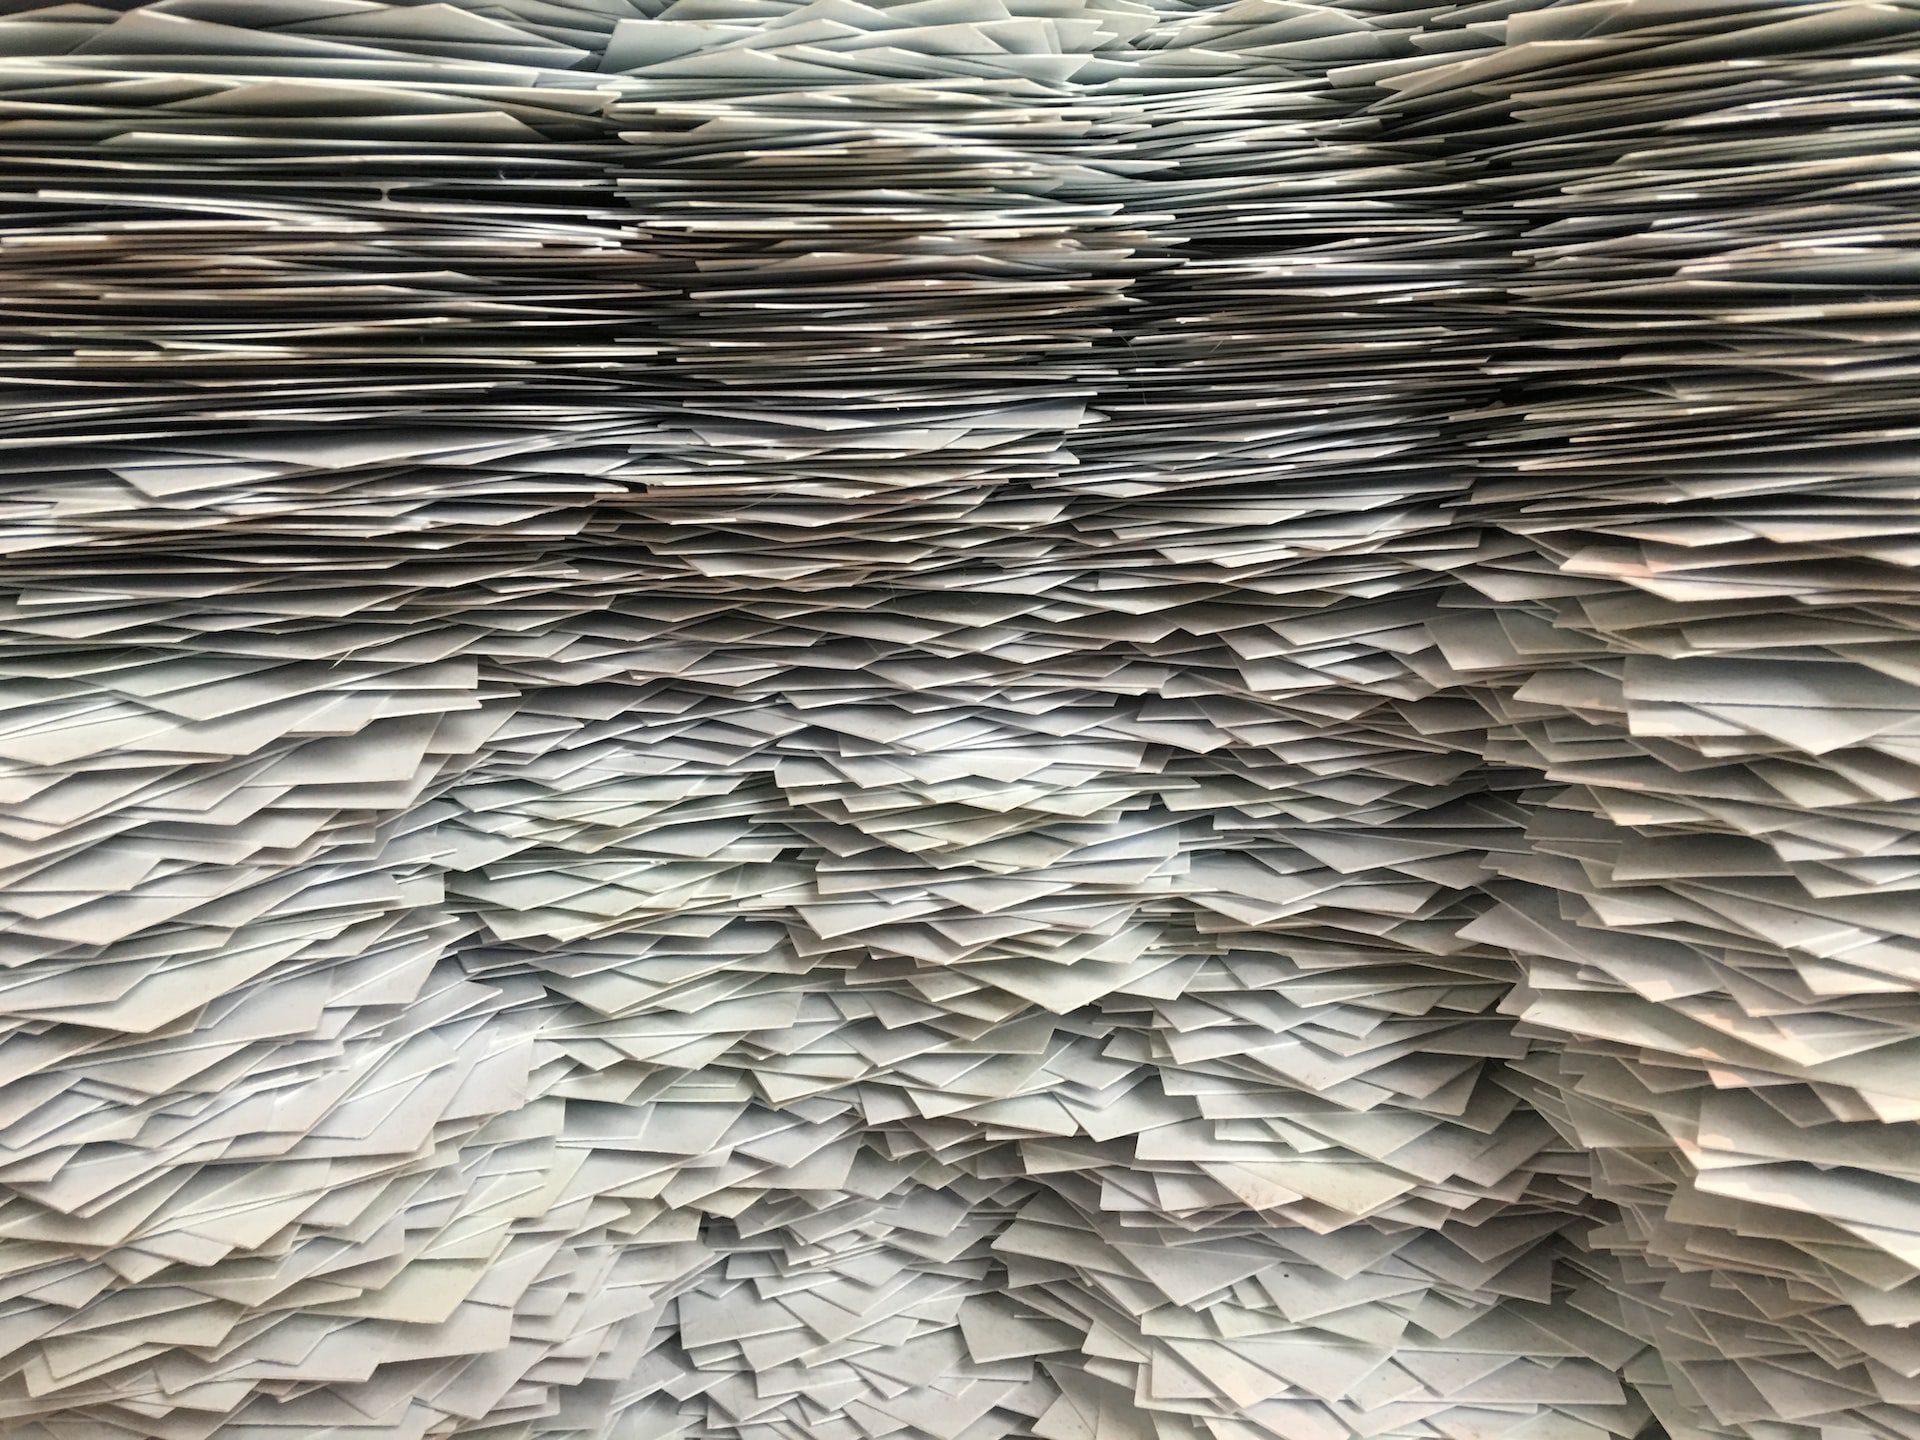 stacks of card filling a room